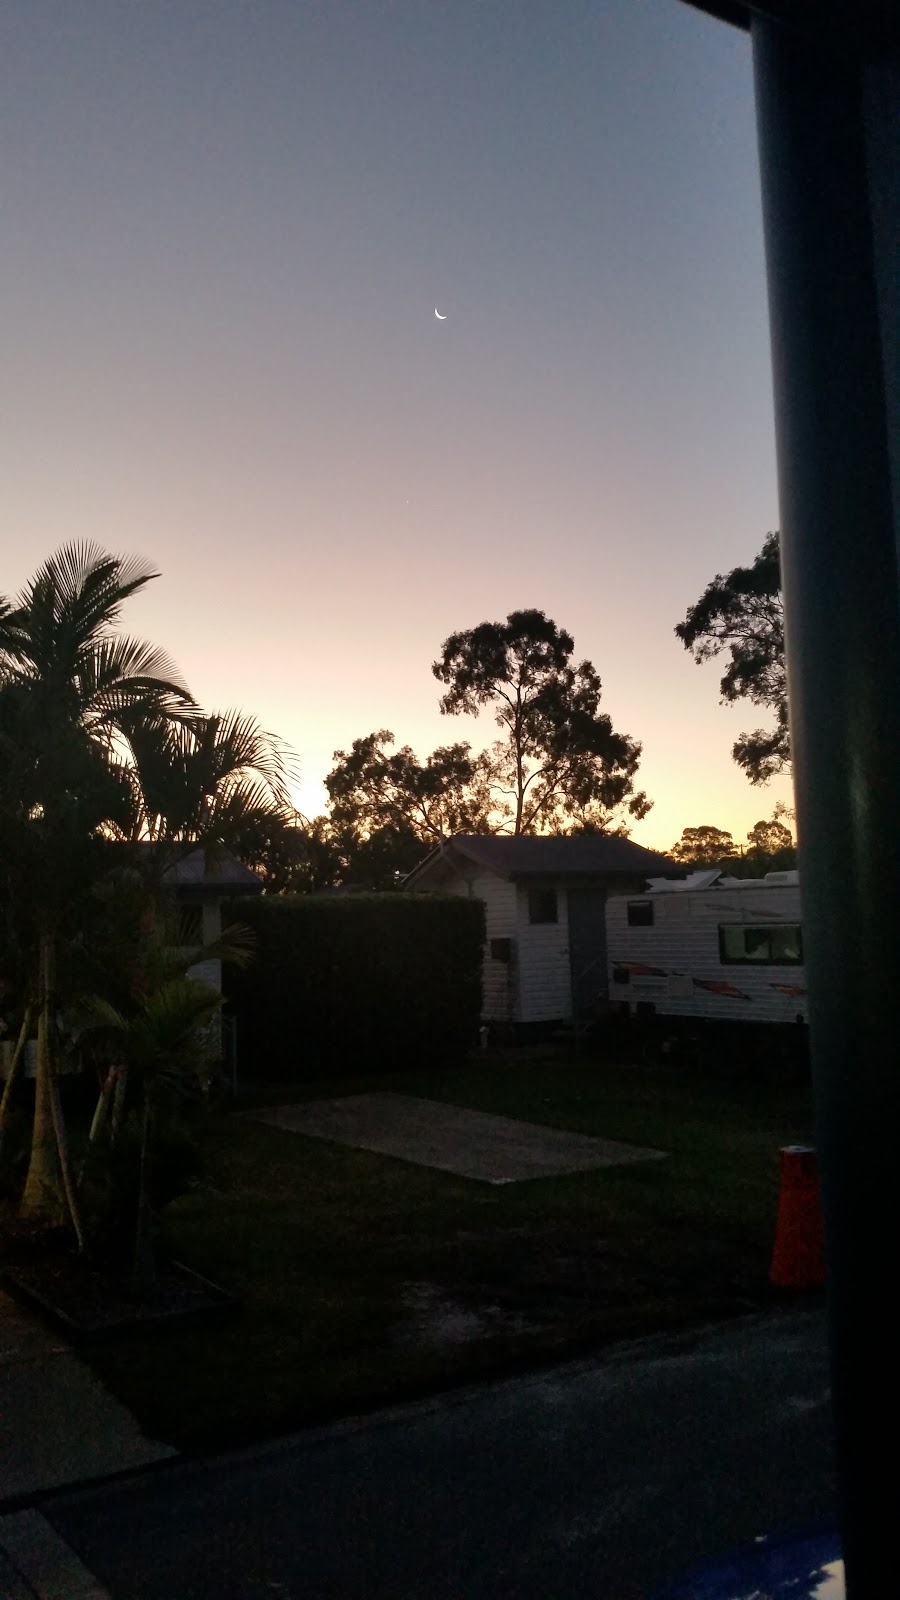 Lazy Acres Caravan Park | campground | 91 Exeter St, Torquay QLD 4655, Australia | 0741251840 OR +61 7 4125 1840